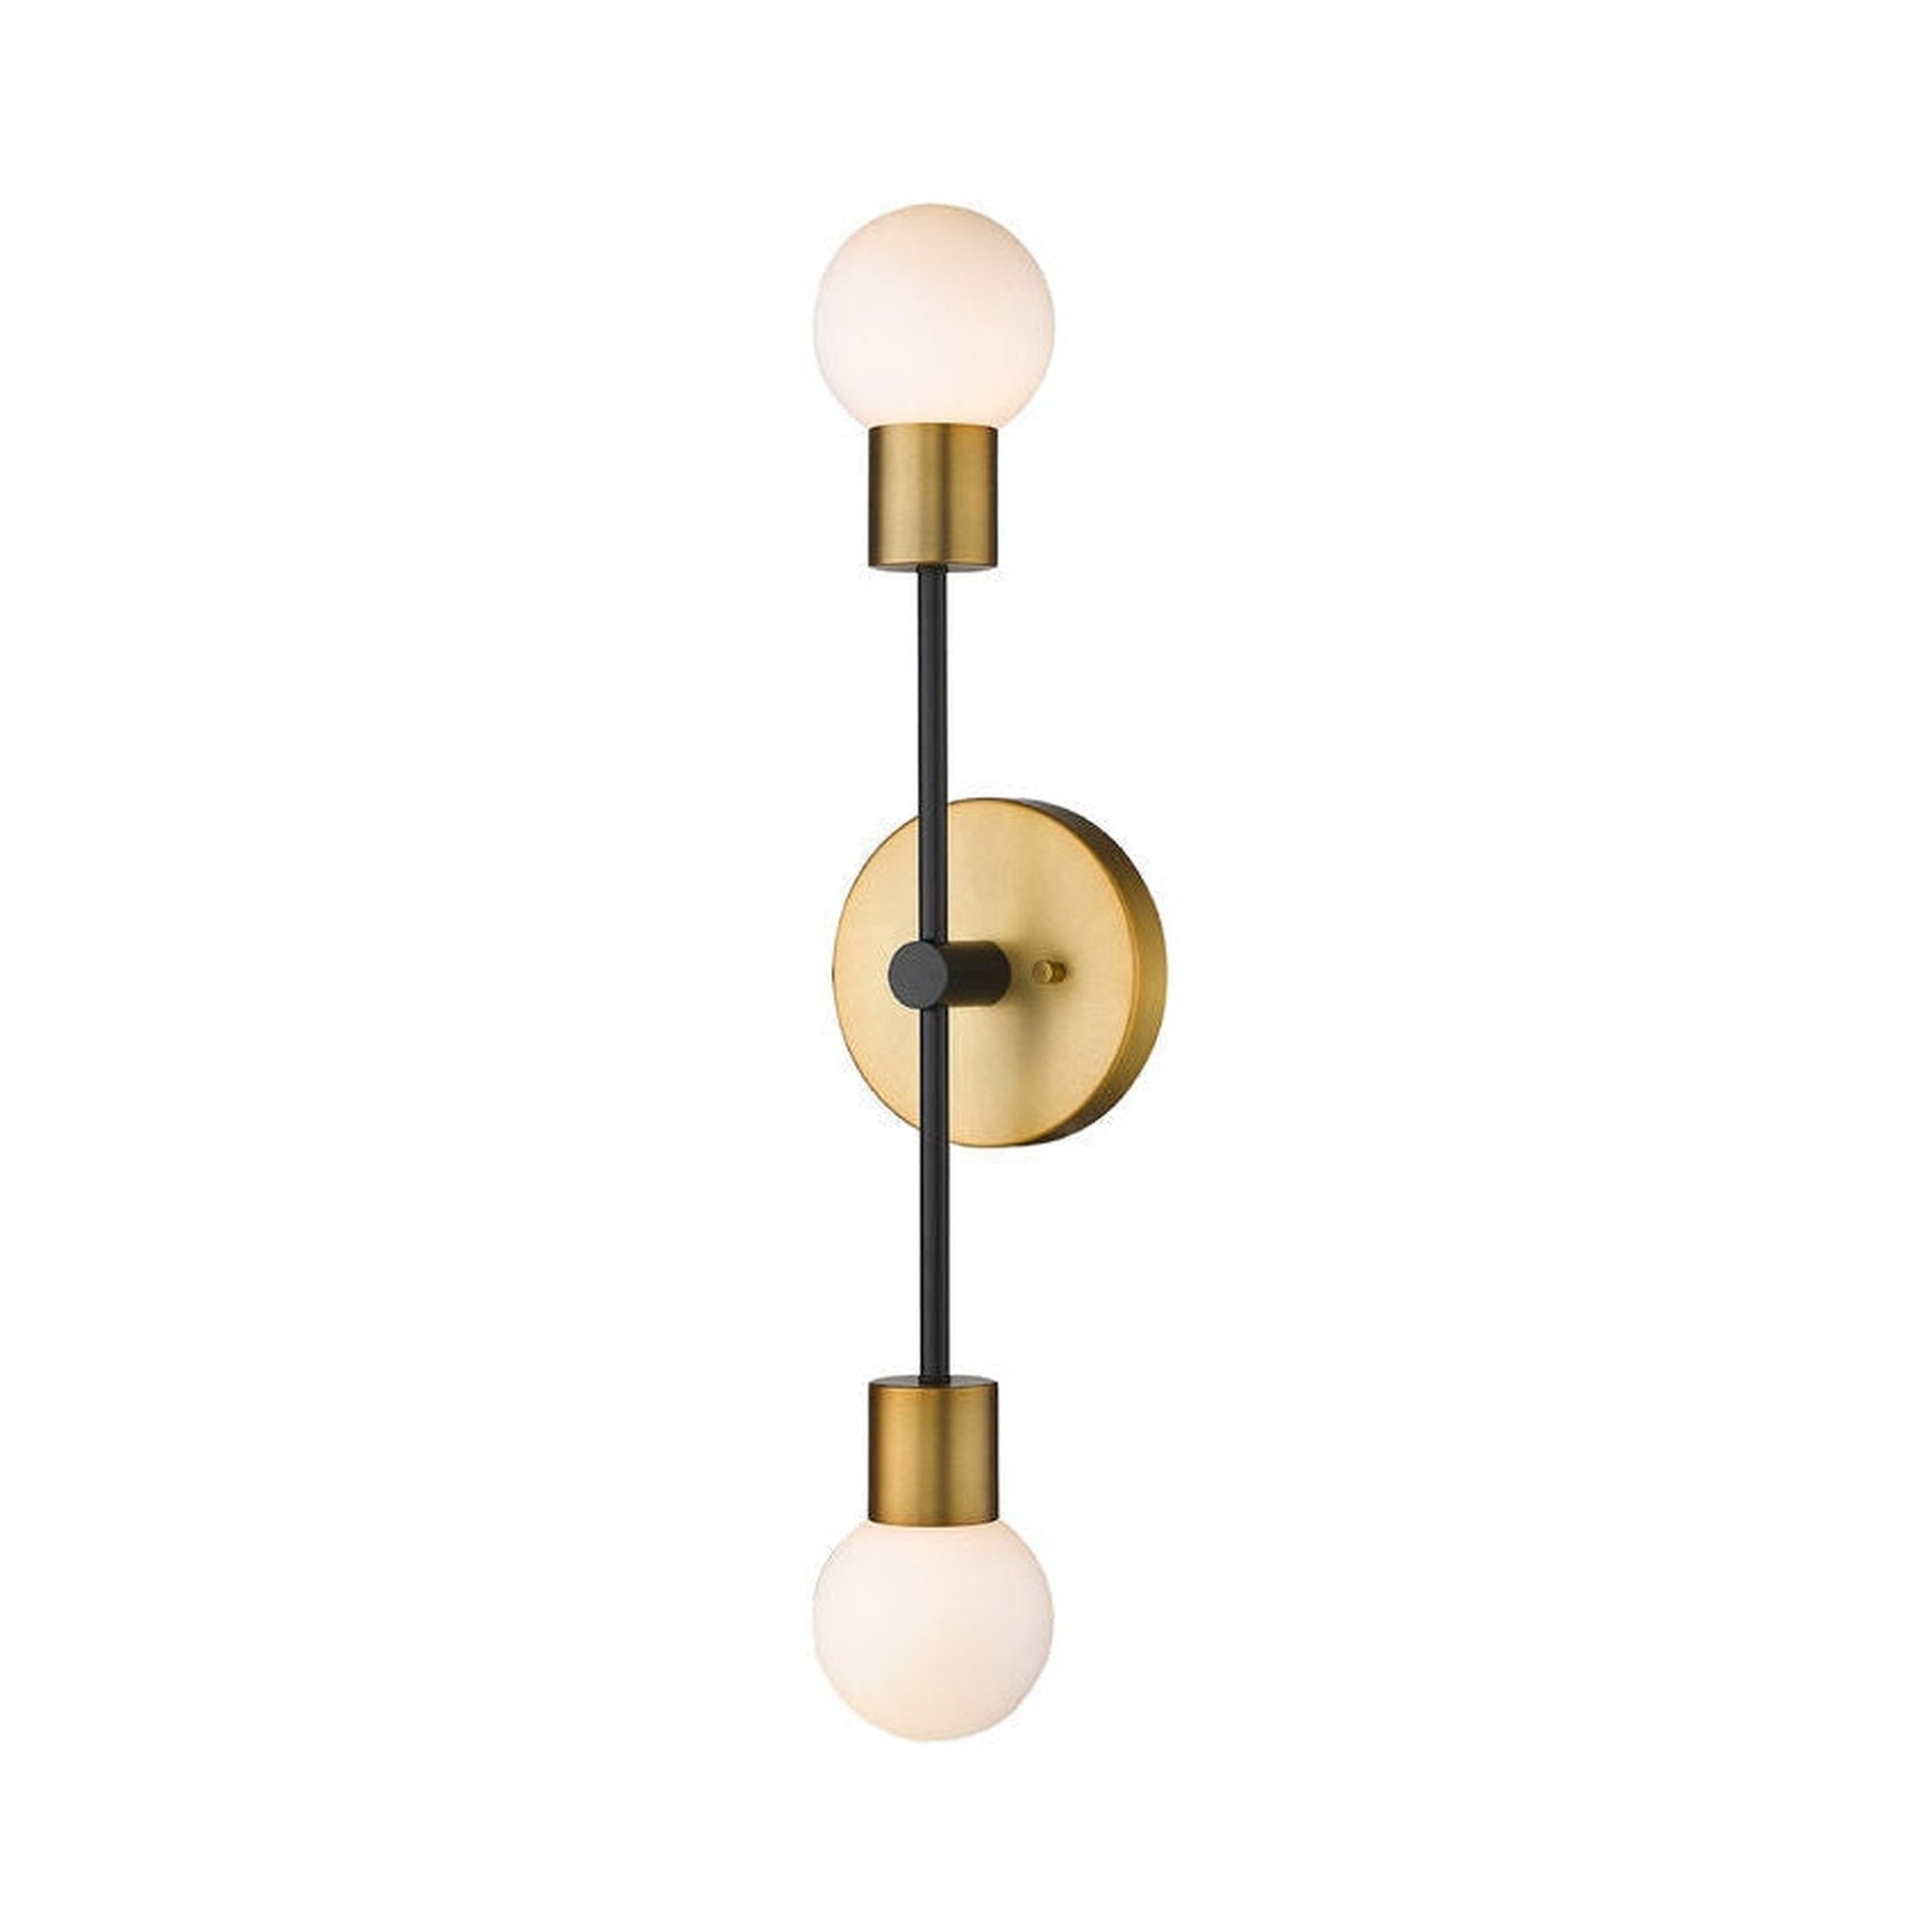 Z-Lite Neutra 6" 2-Light Matte Black and Foundry Brass Wall Sconce With Opal Glass Shade